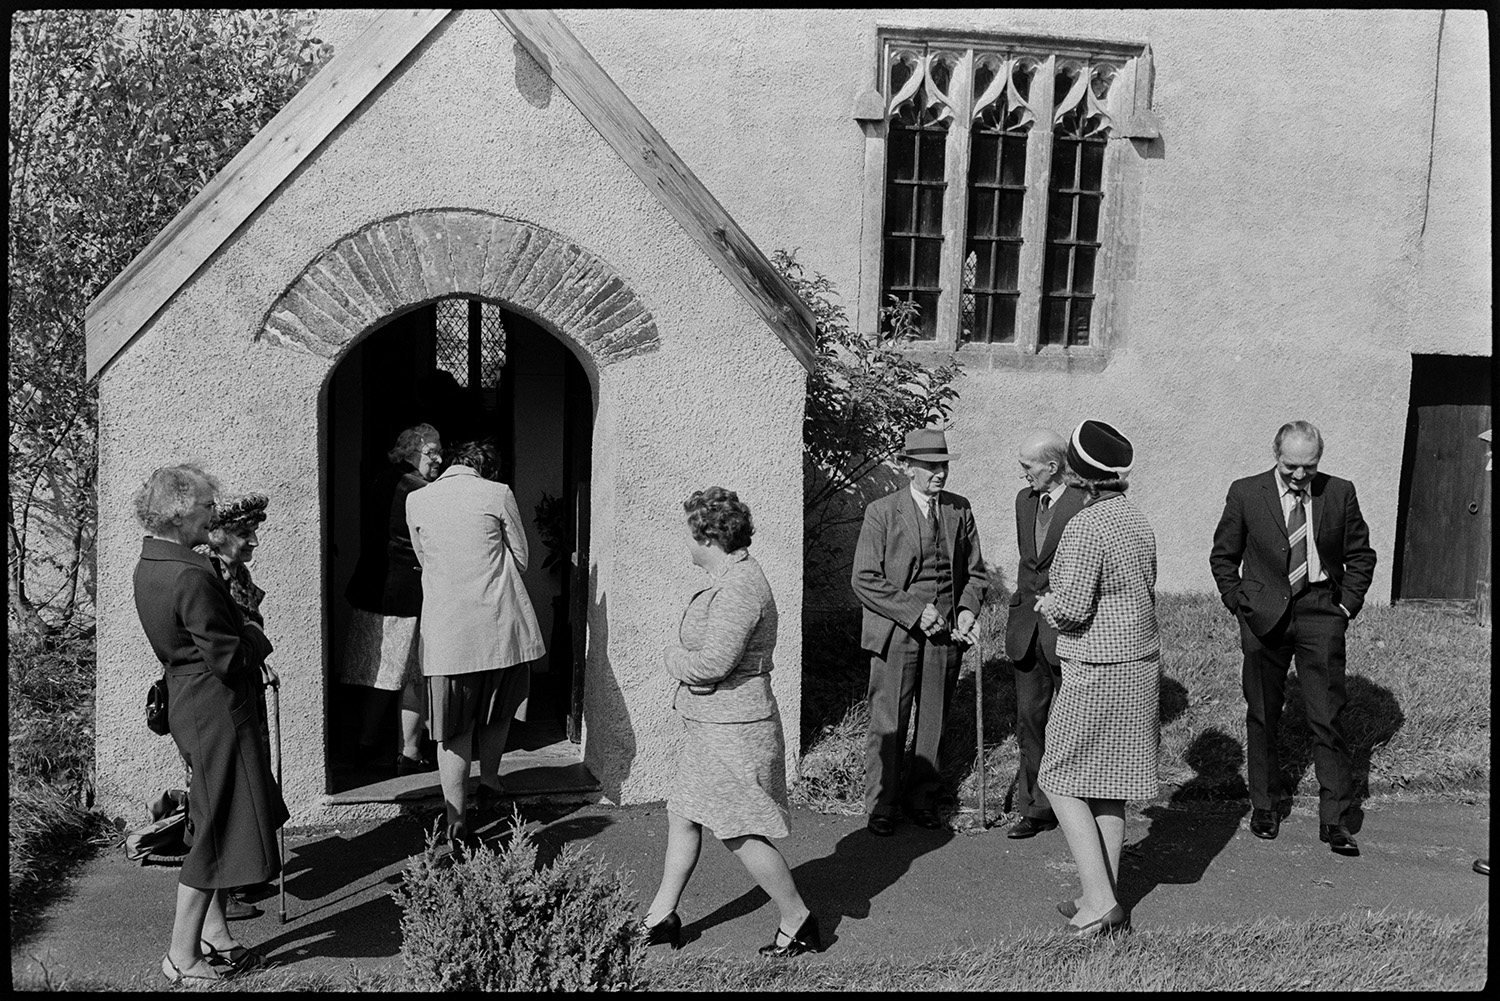 People going into church, clothes, Sunday best dresses and suits, church porch and window.
[Men and women entering the Church of St. Peter, Dowland for the Harvest Festival. They are wearing suits, dresses and hats. In addition to the church porch entrance, the detail of the window to the right of the porch can be seen.]